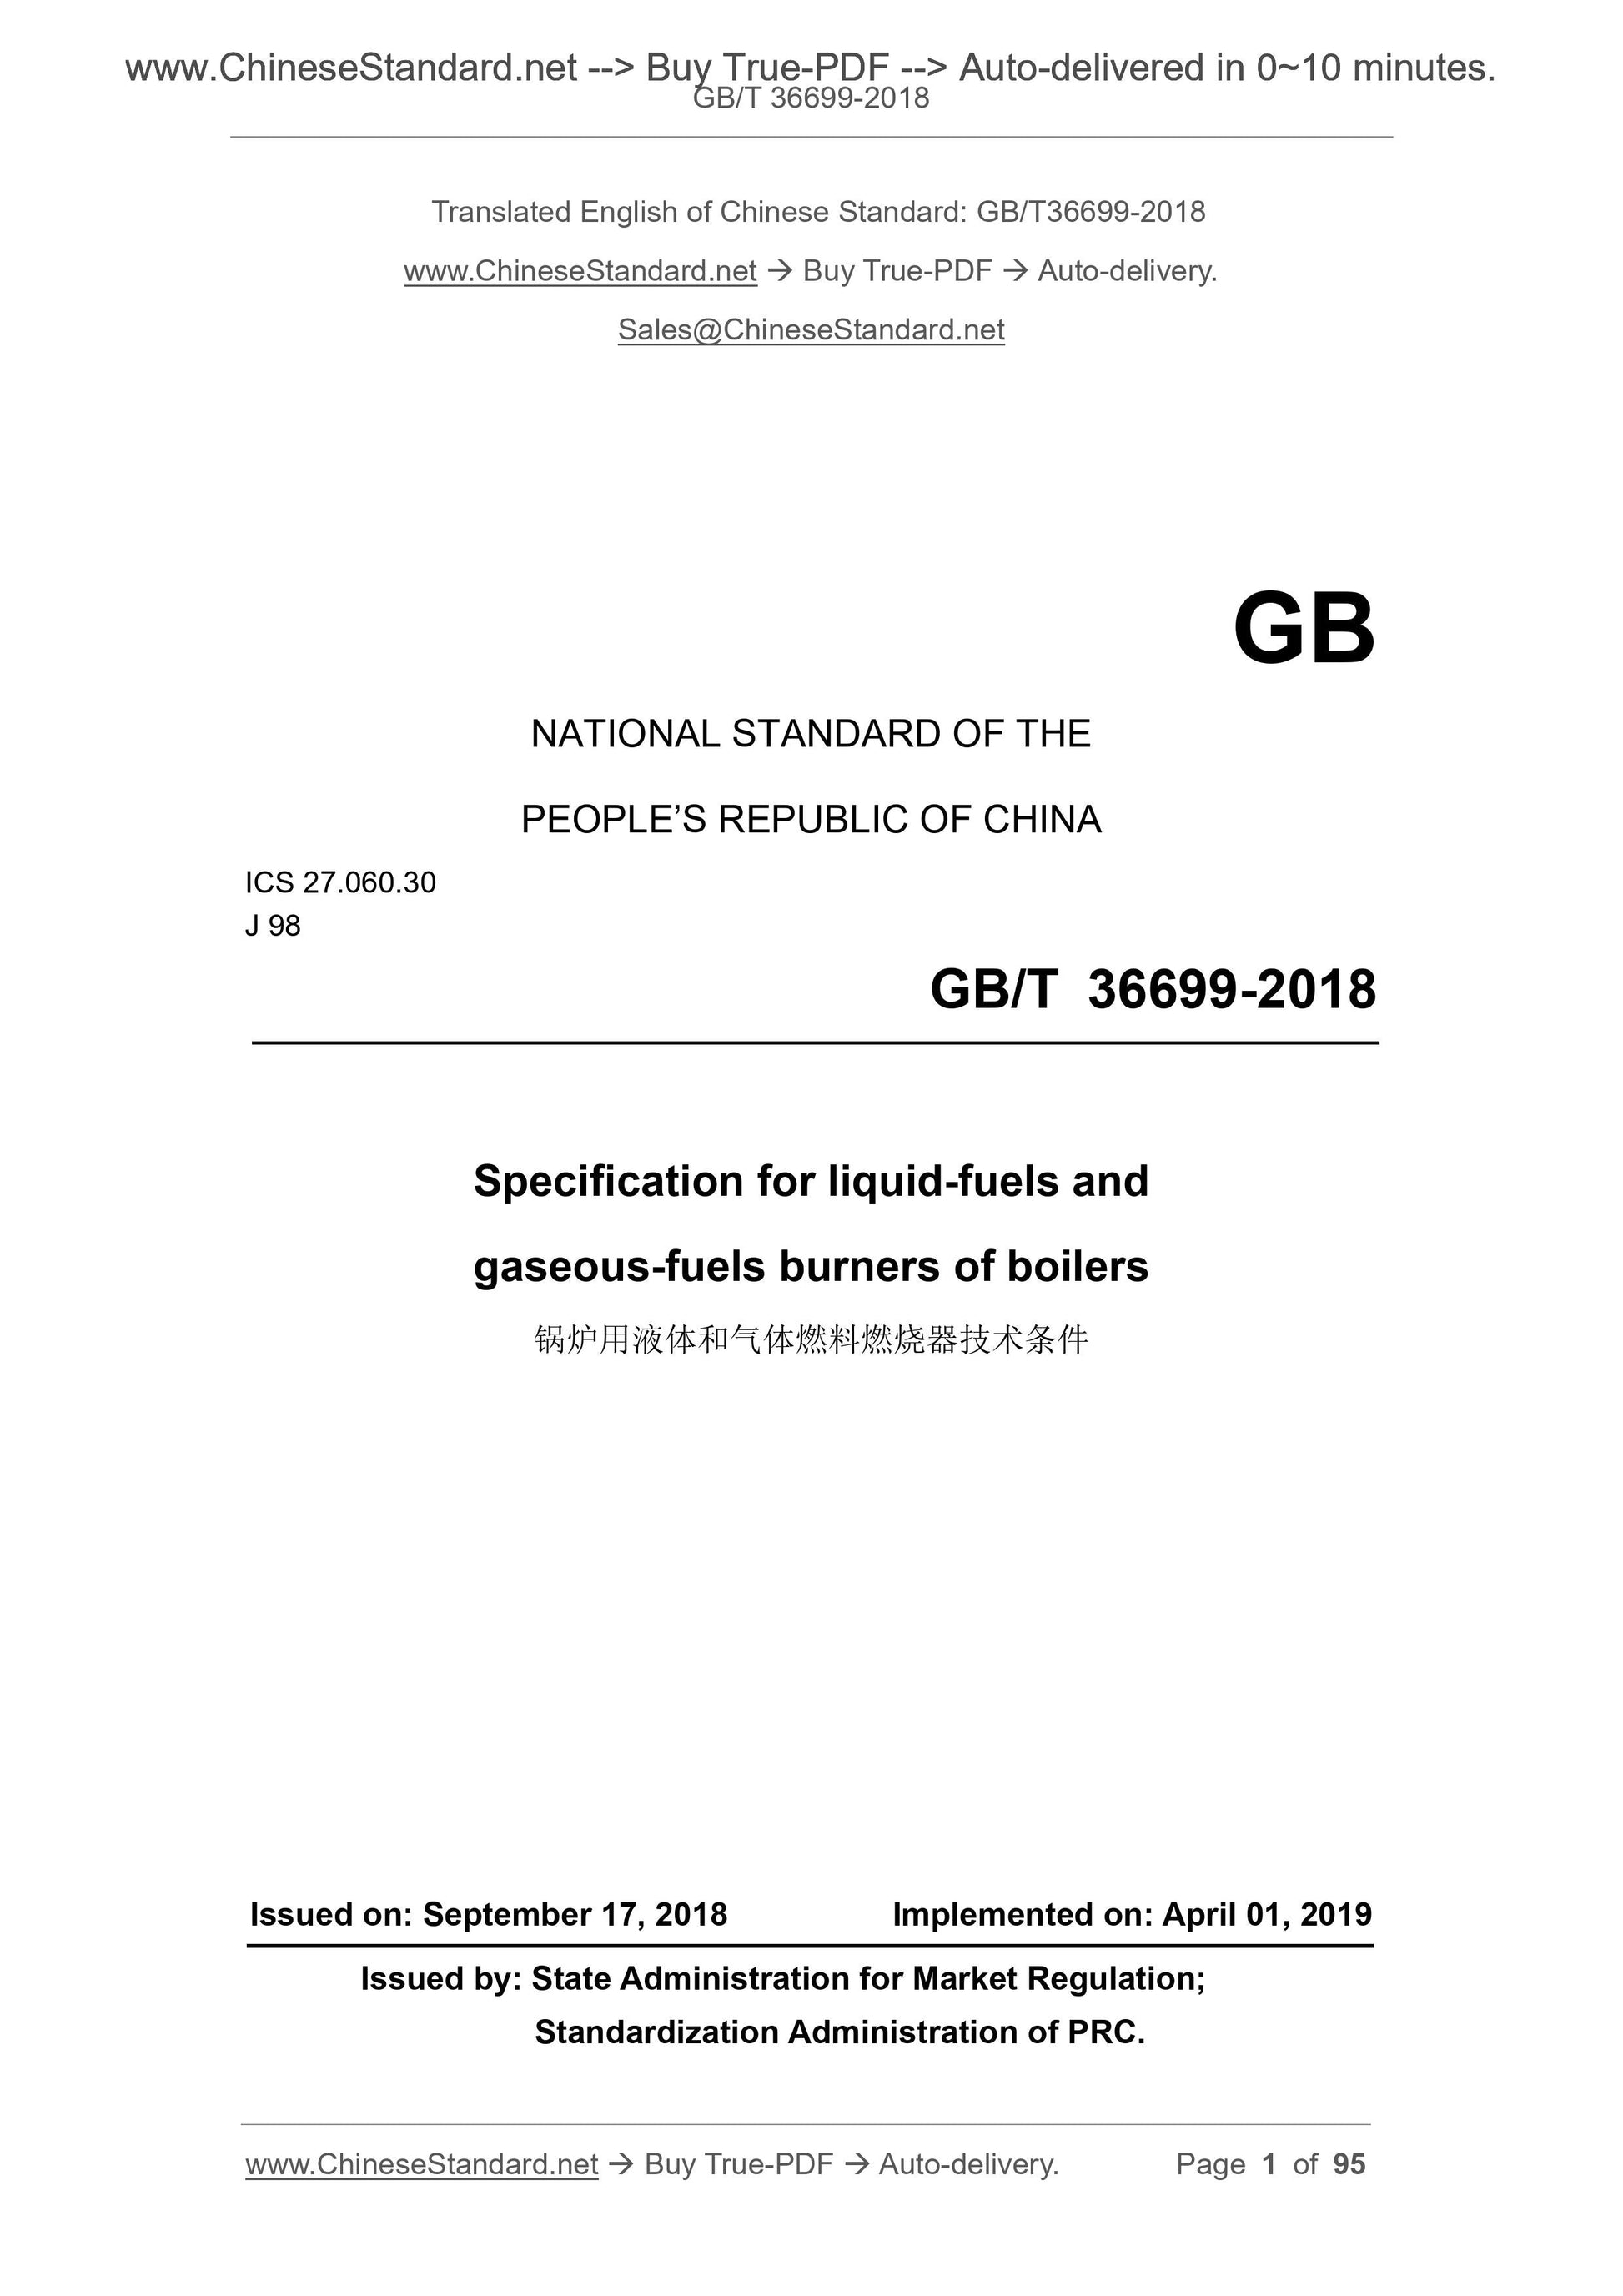 GB/T 36699-2018 Page 1